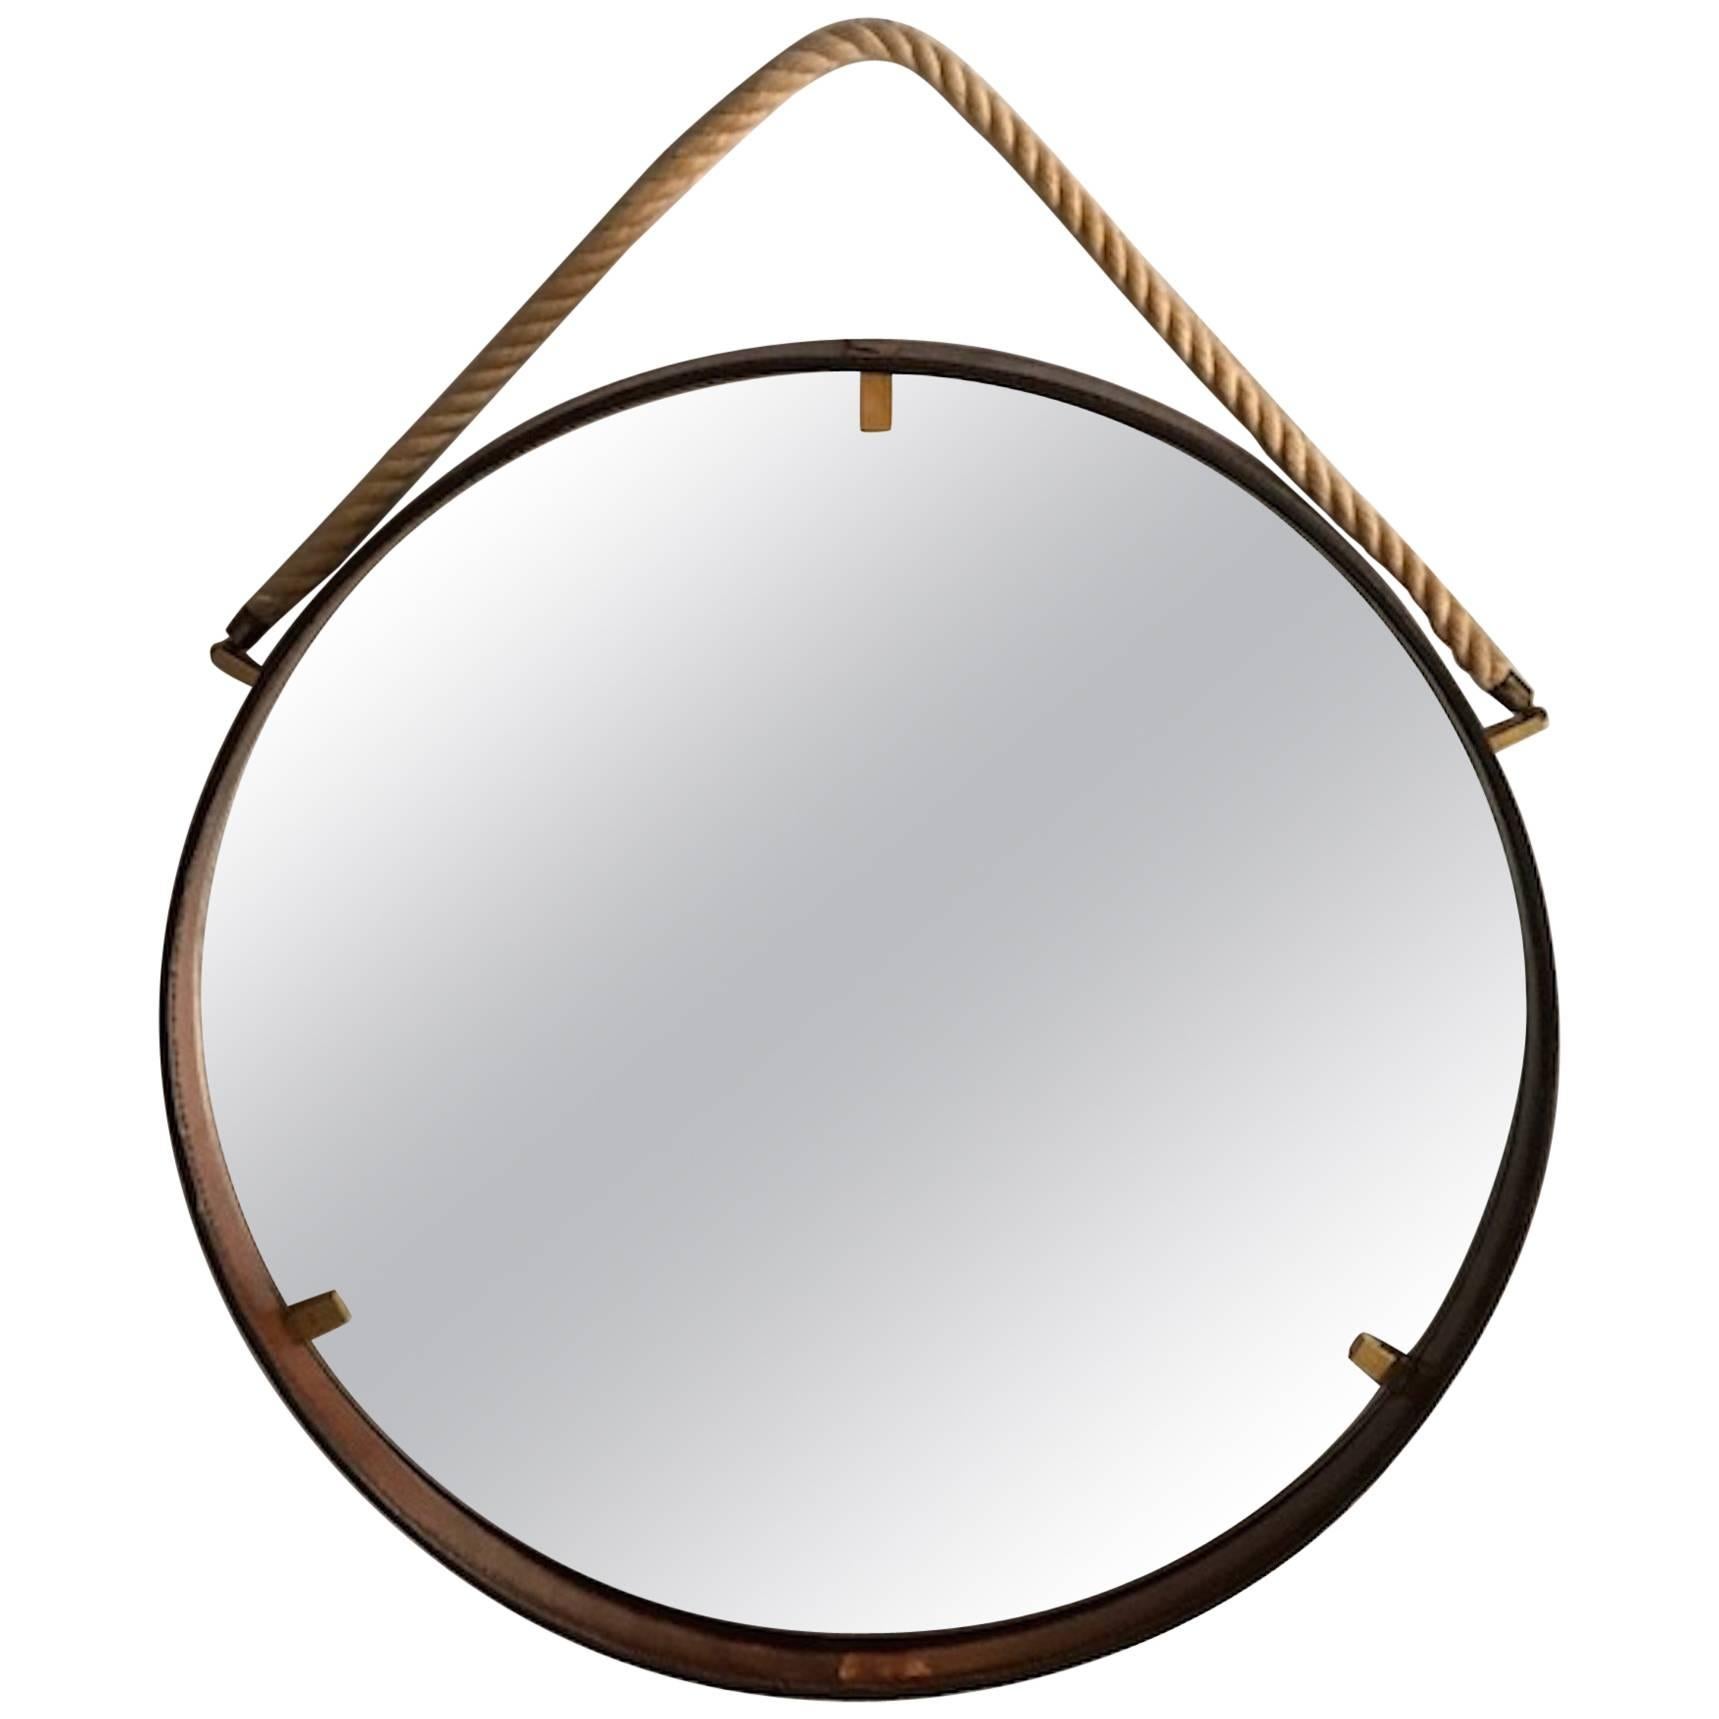 Italian Stitched Leather Round Mirror with Brass Accents and Rope